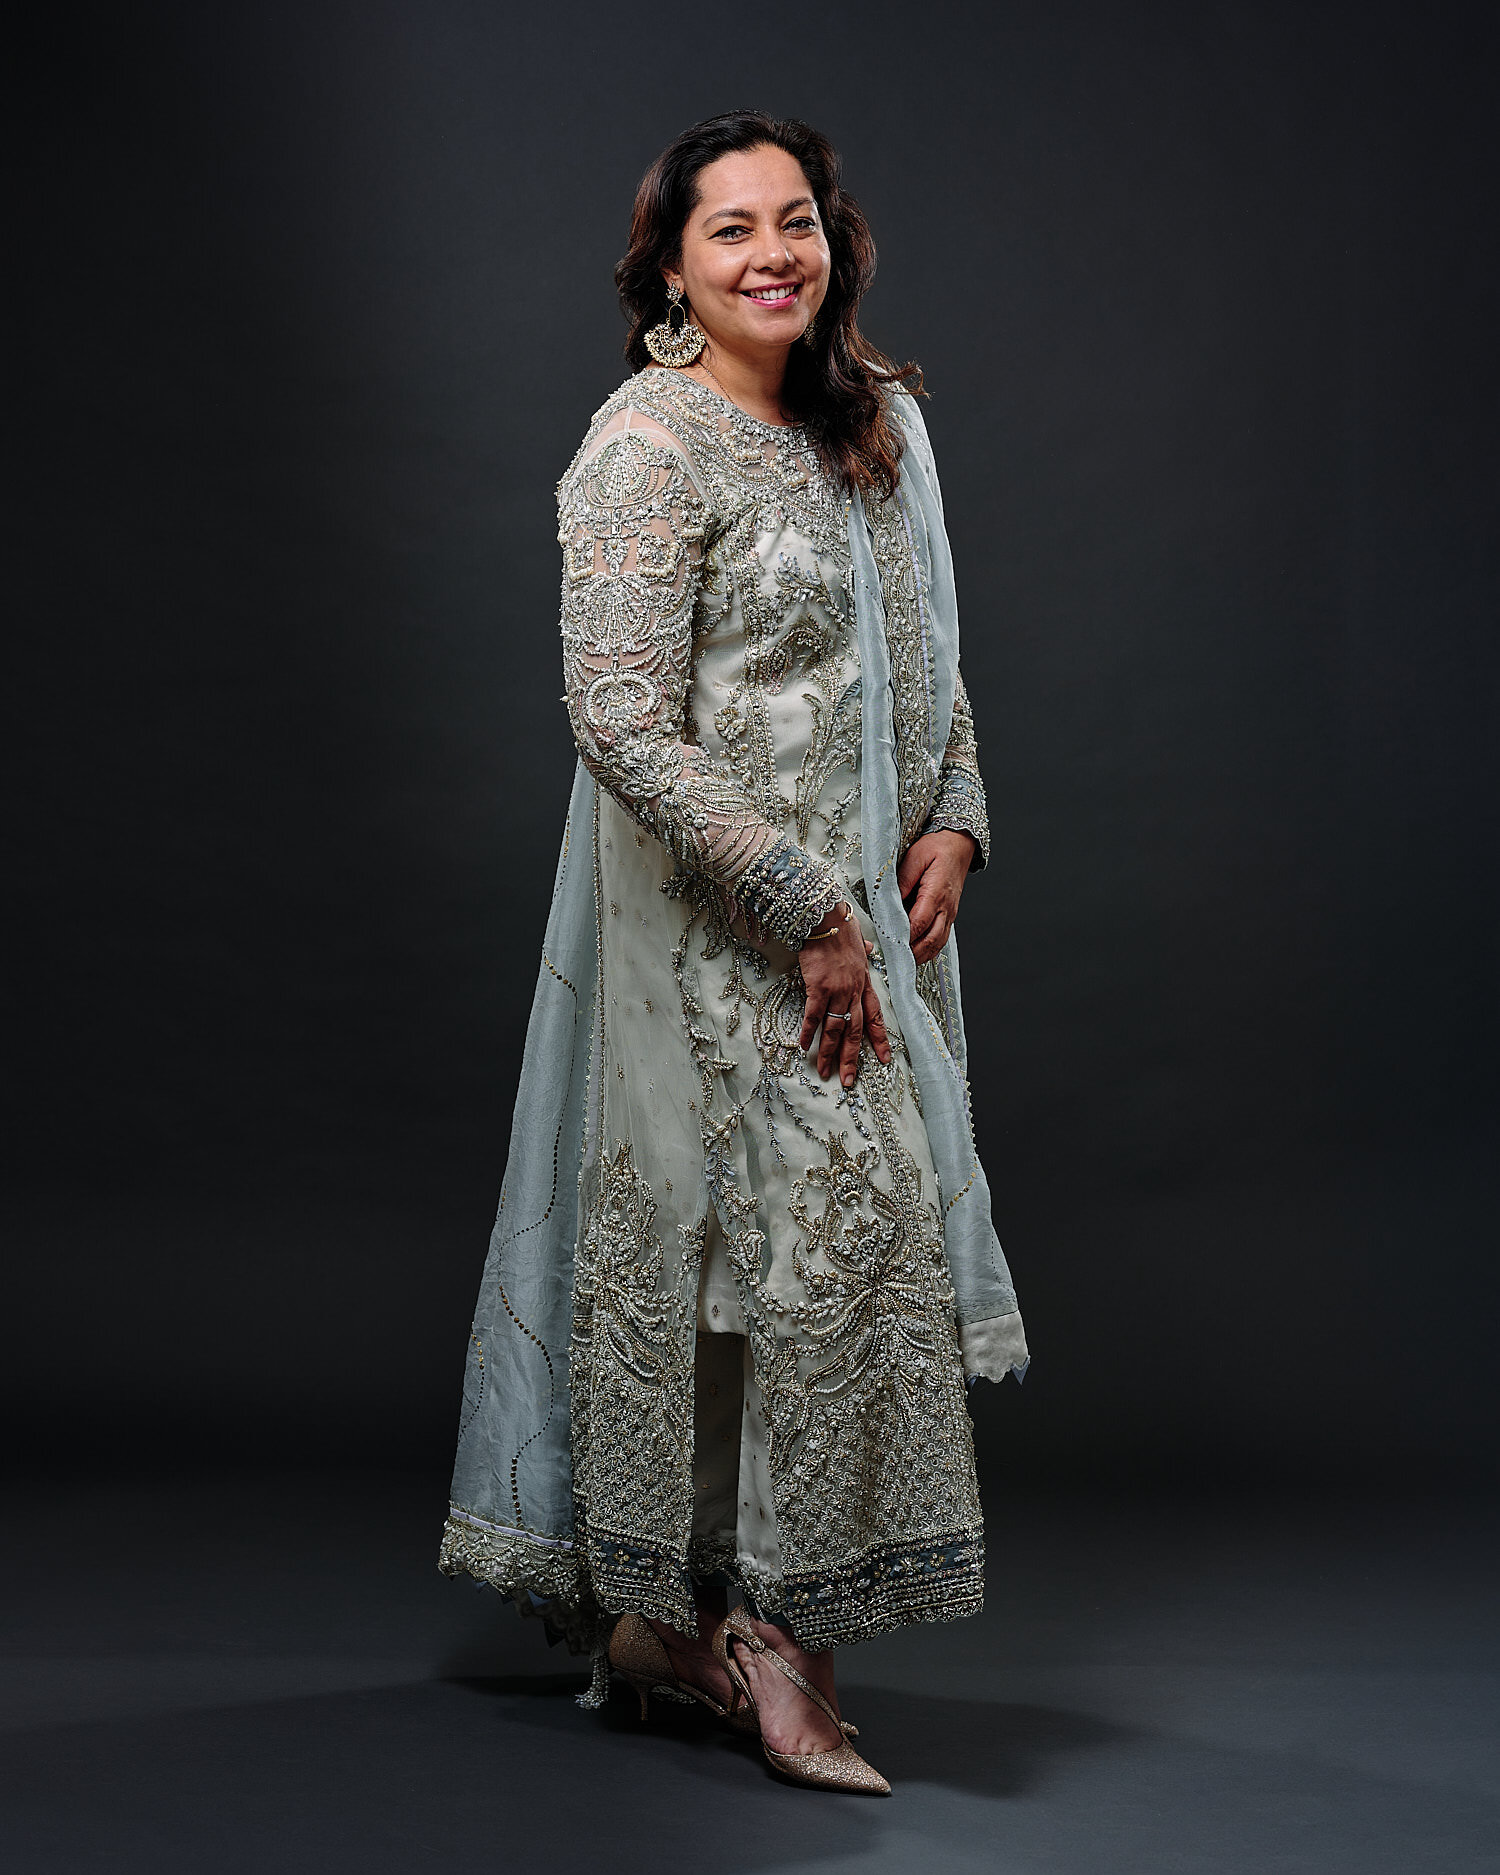  Bushra and Saad are posing for their wedding portraits in a professional photography studio. Bushra is dressed in a stunning pale dress ornamented with pearls, floral motives. Saad wears a blue suit. 